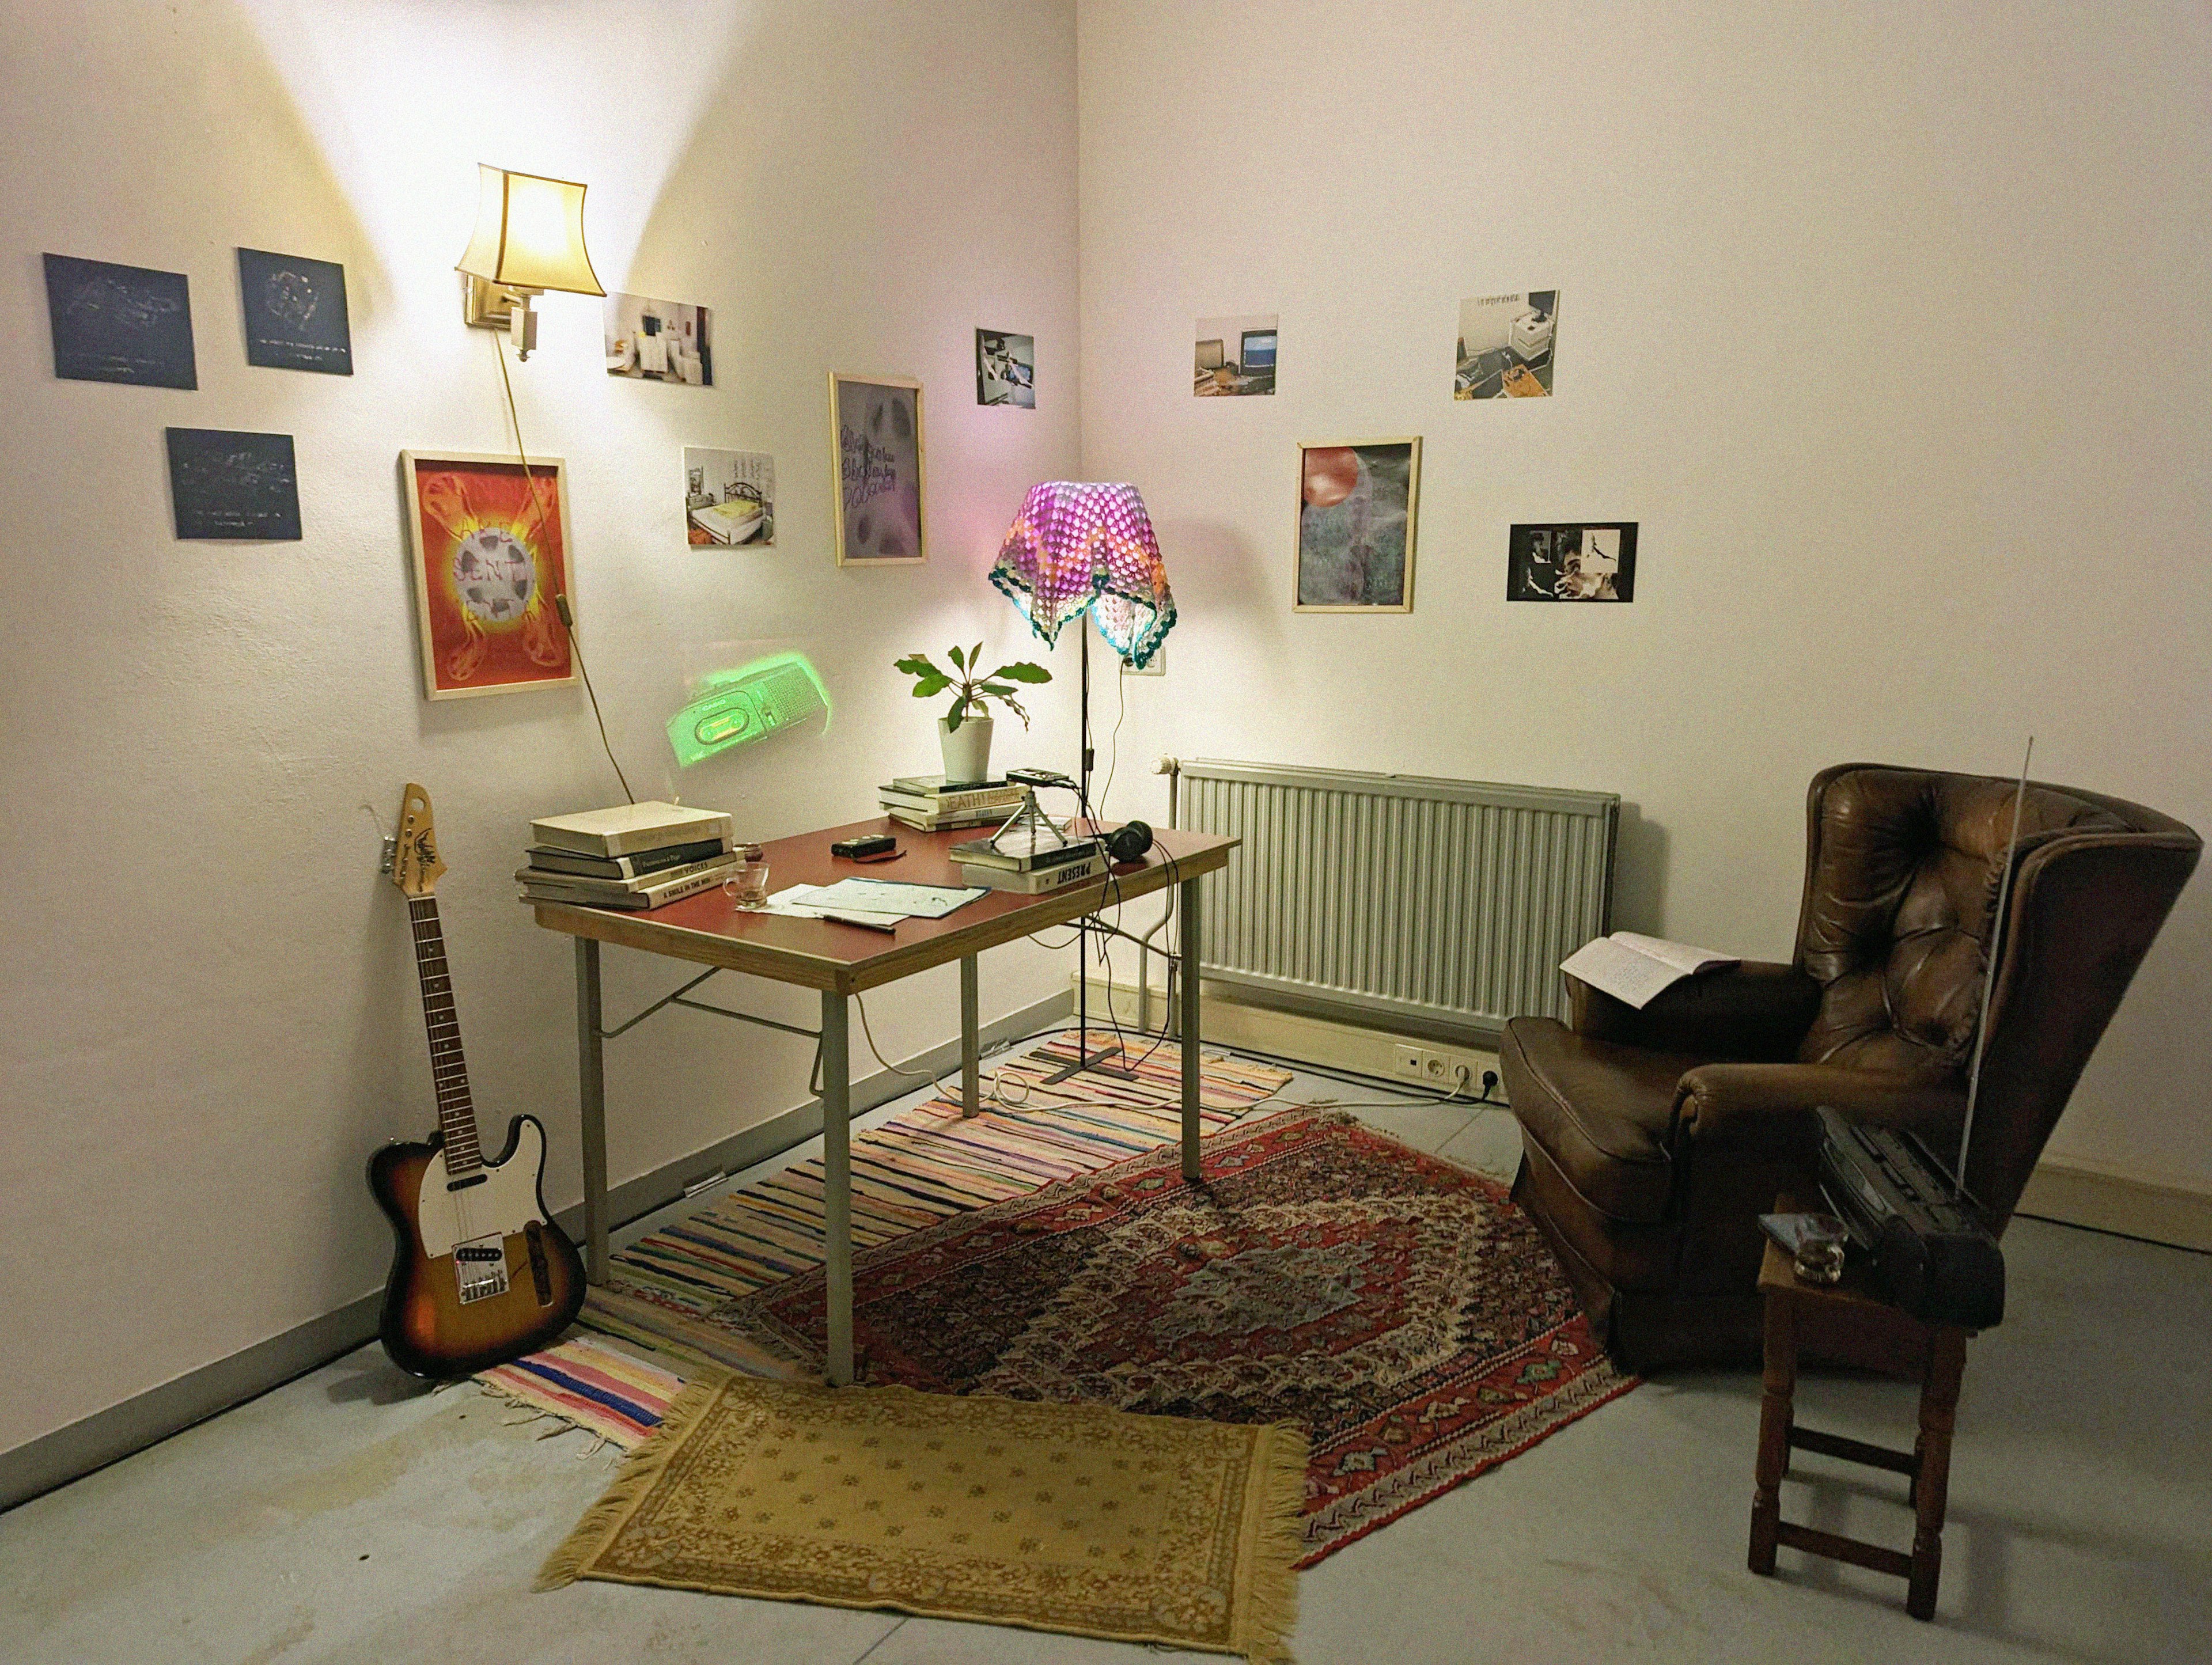 A domestic setting featuring rugs, an arm chair near a radio, a desk with books and a tape recorder, a guitar, and a wall decorated with several photos, a sconce, and a small projection of a video